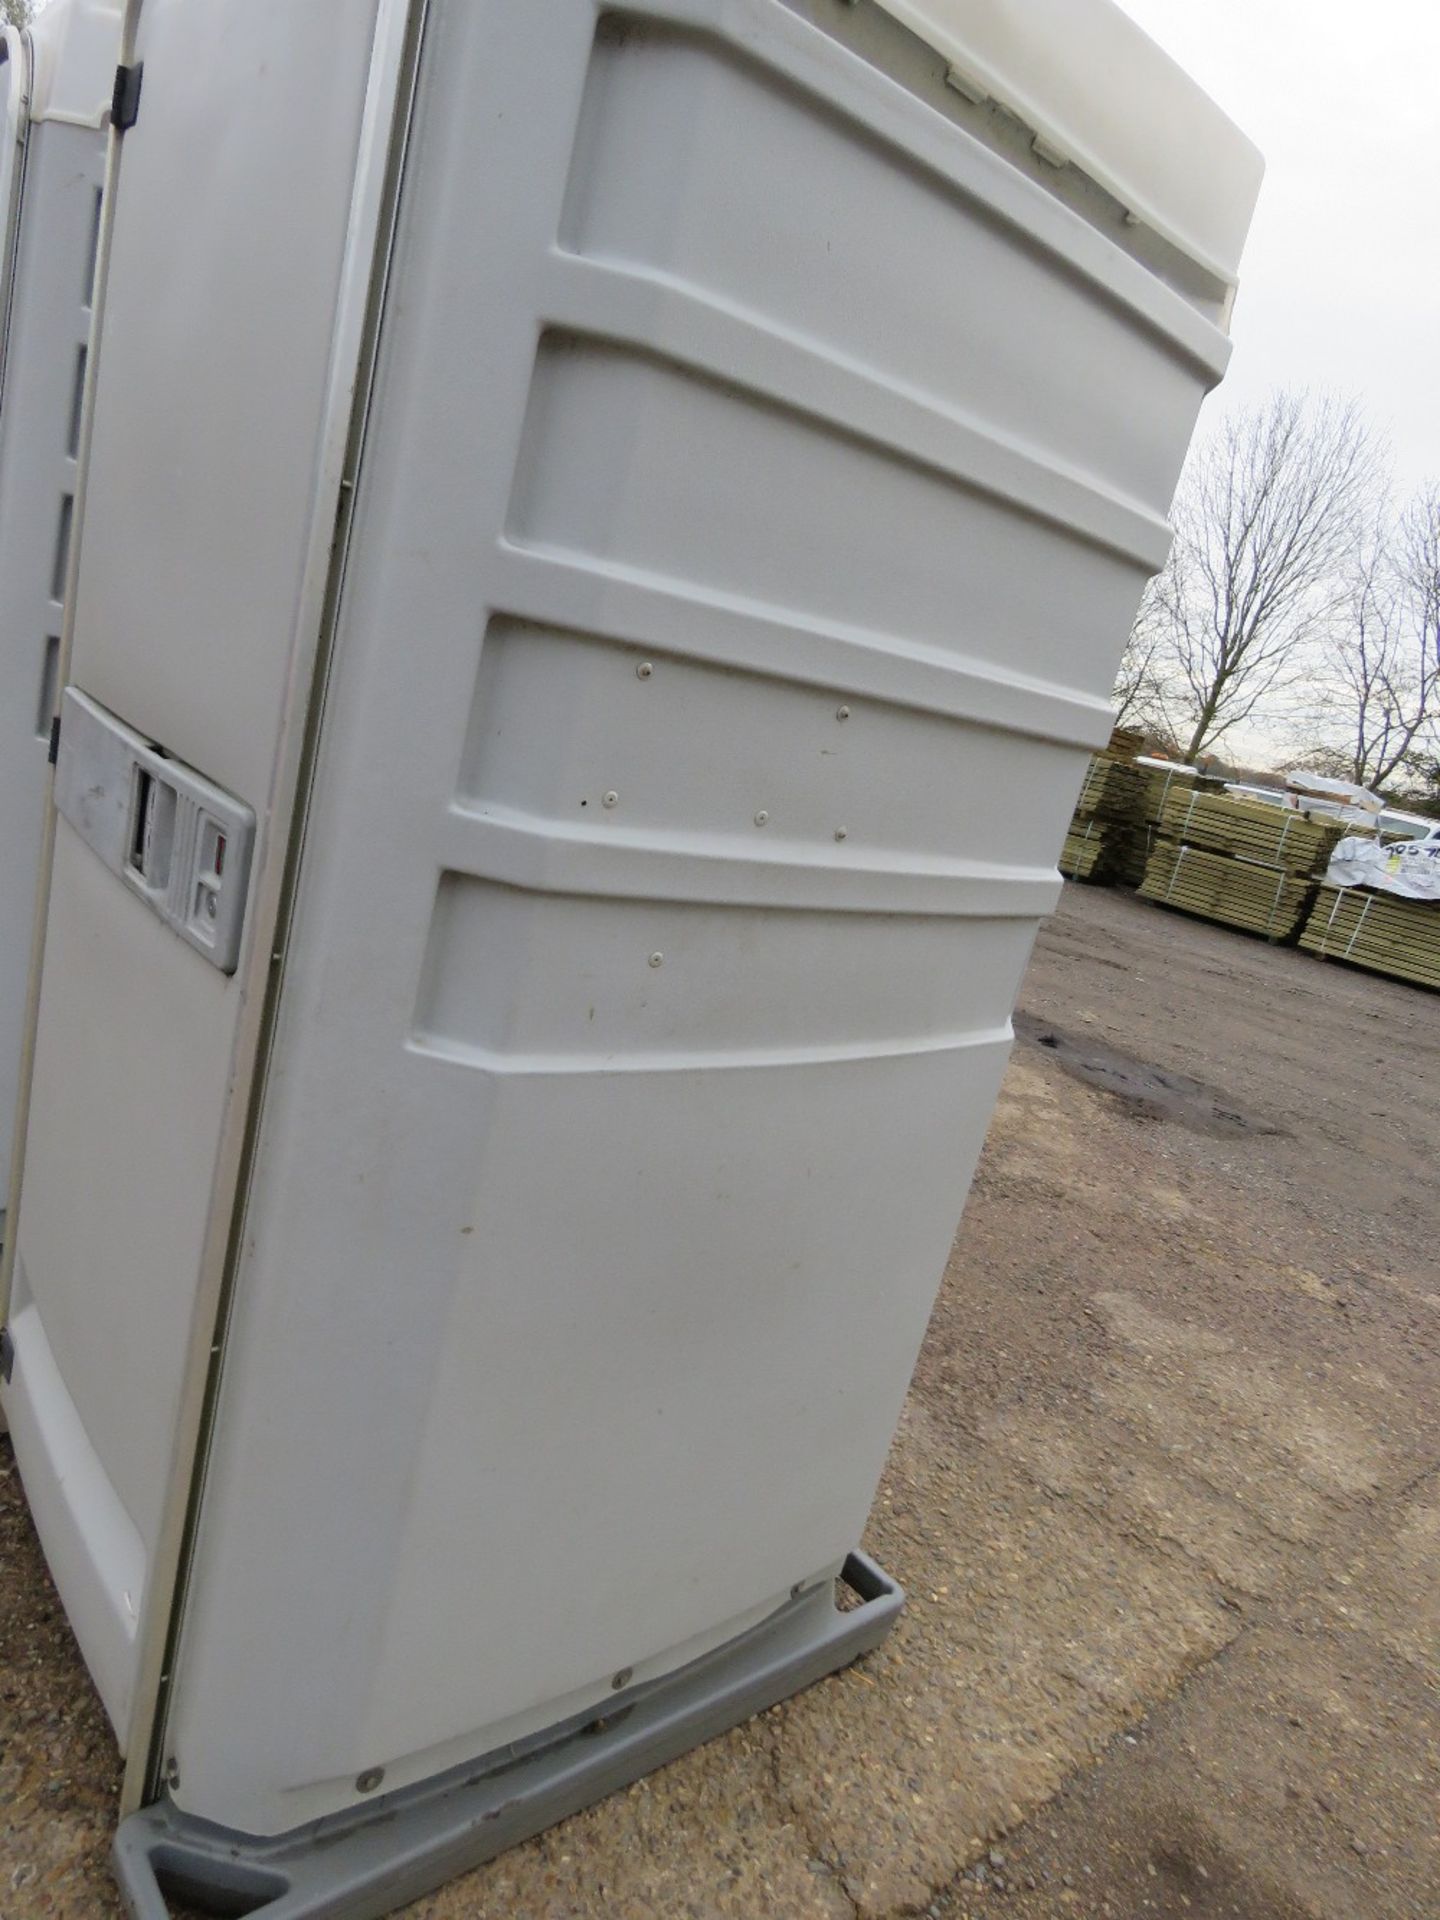 PORTABLE SITE TOILET. DIRECT FROM LOCAL COMPANY. - Image 2 of 5